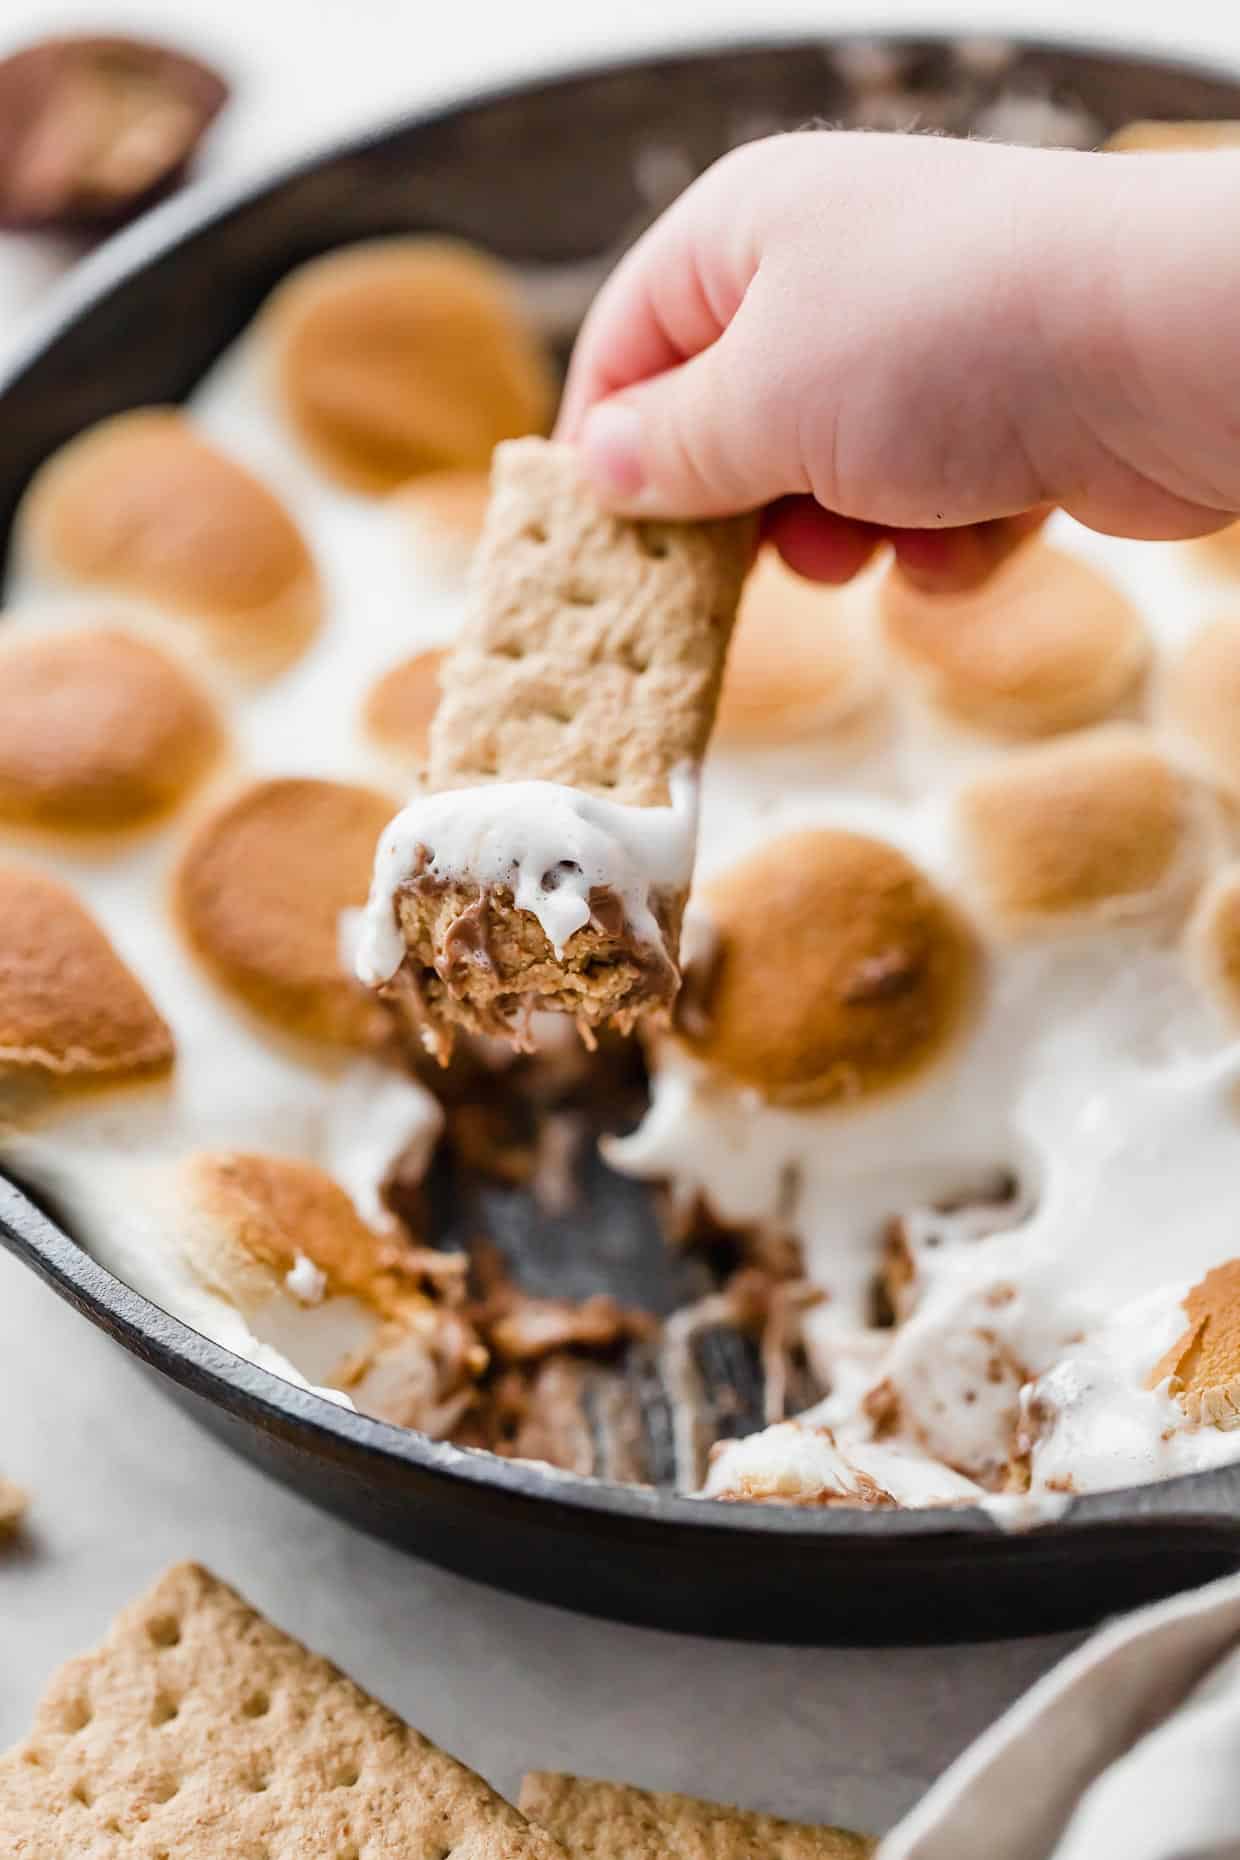 A hand dipping a graham cracker into a Reese's S'mores skillet.